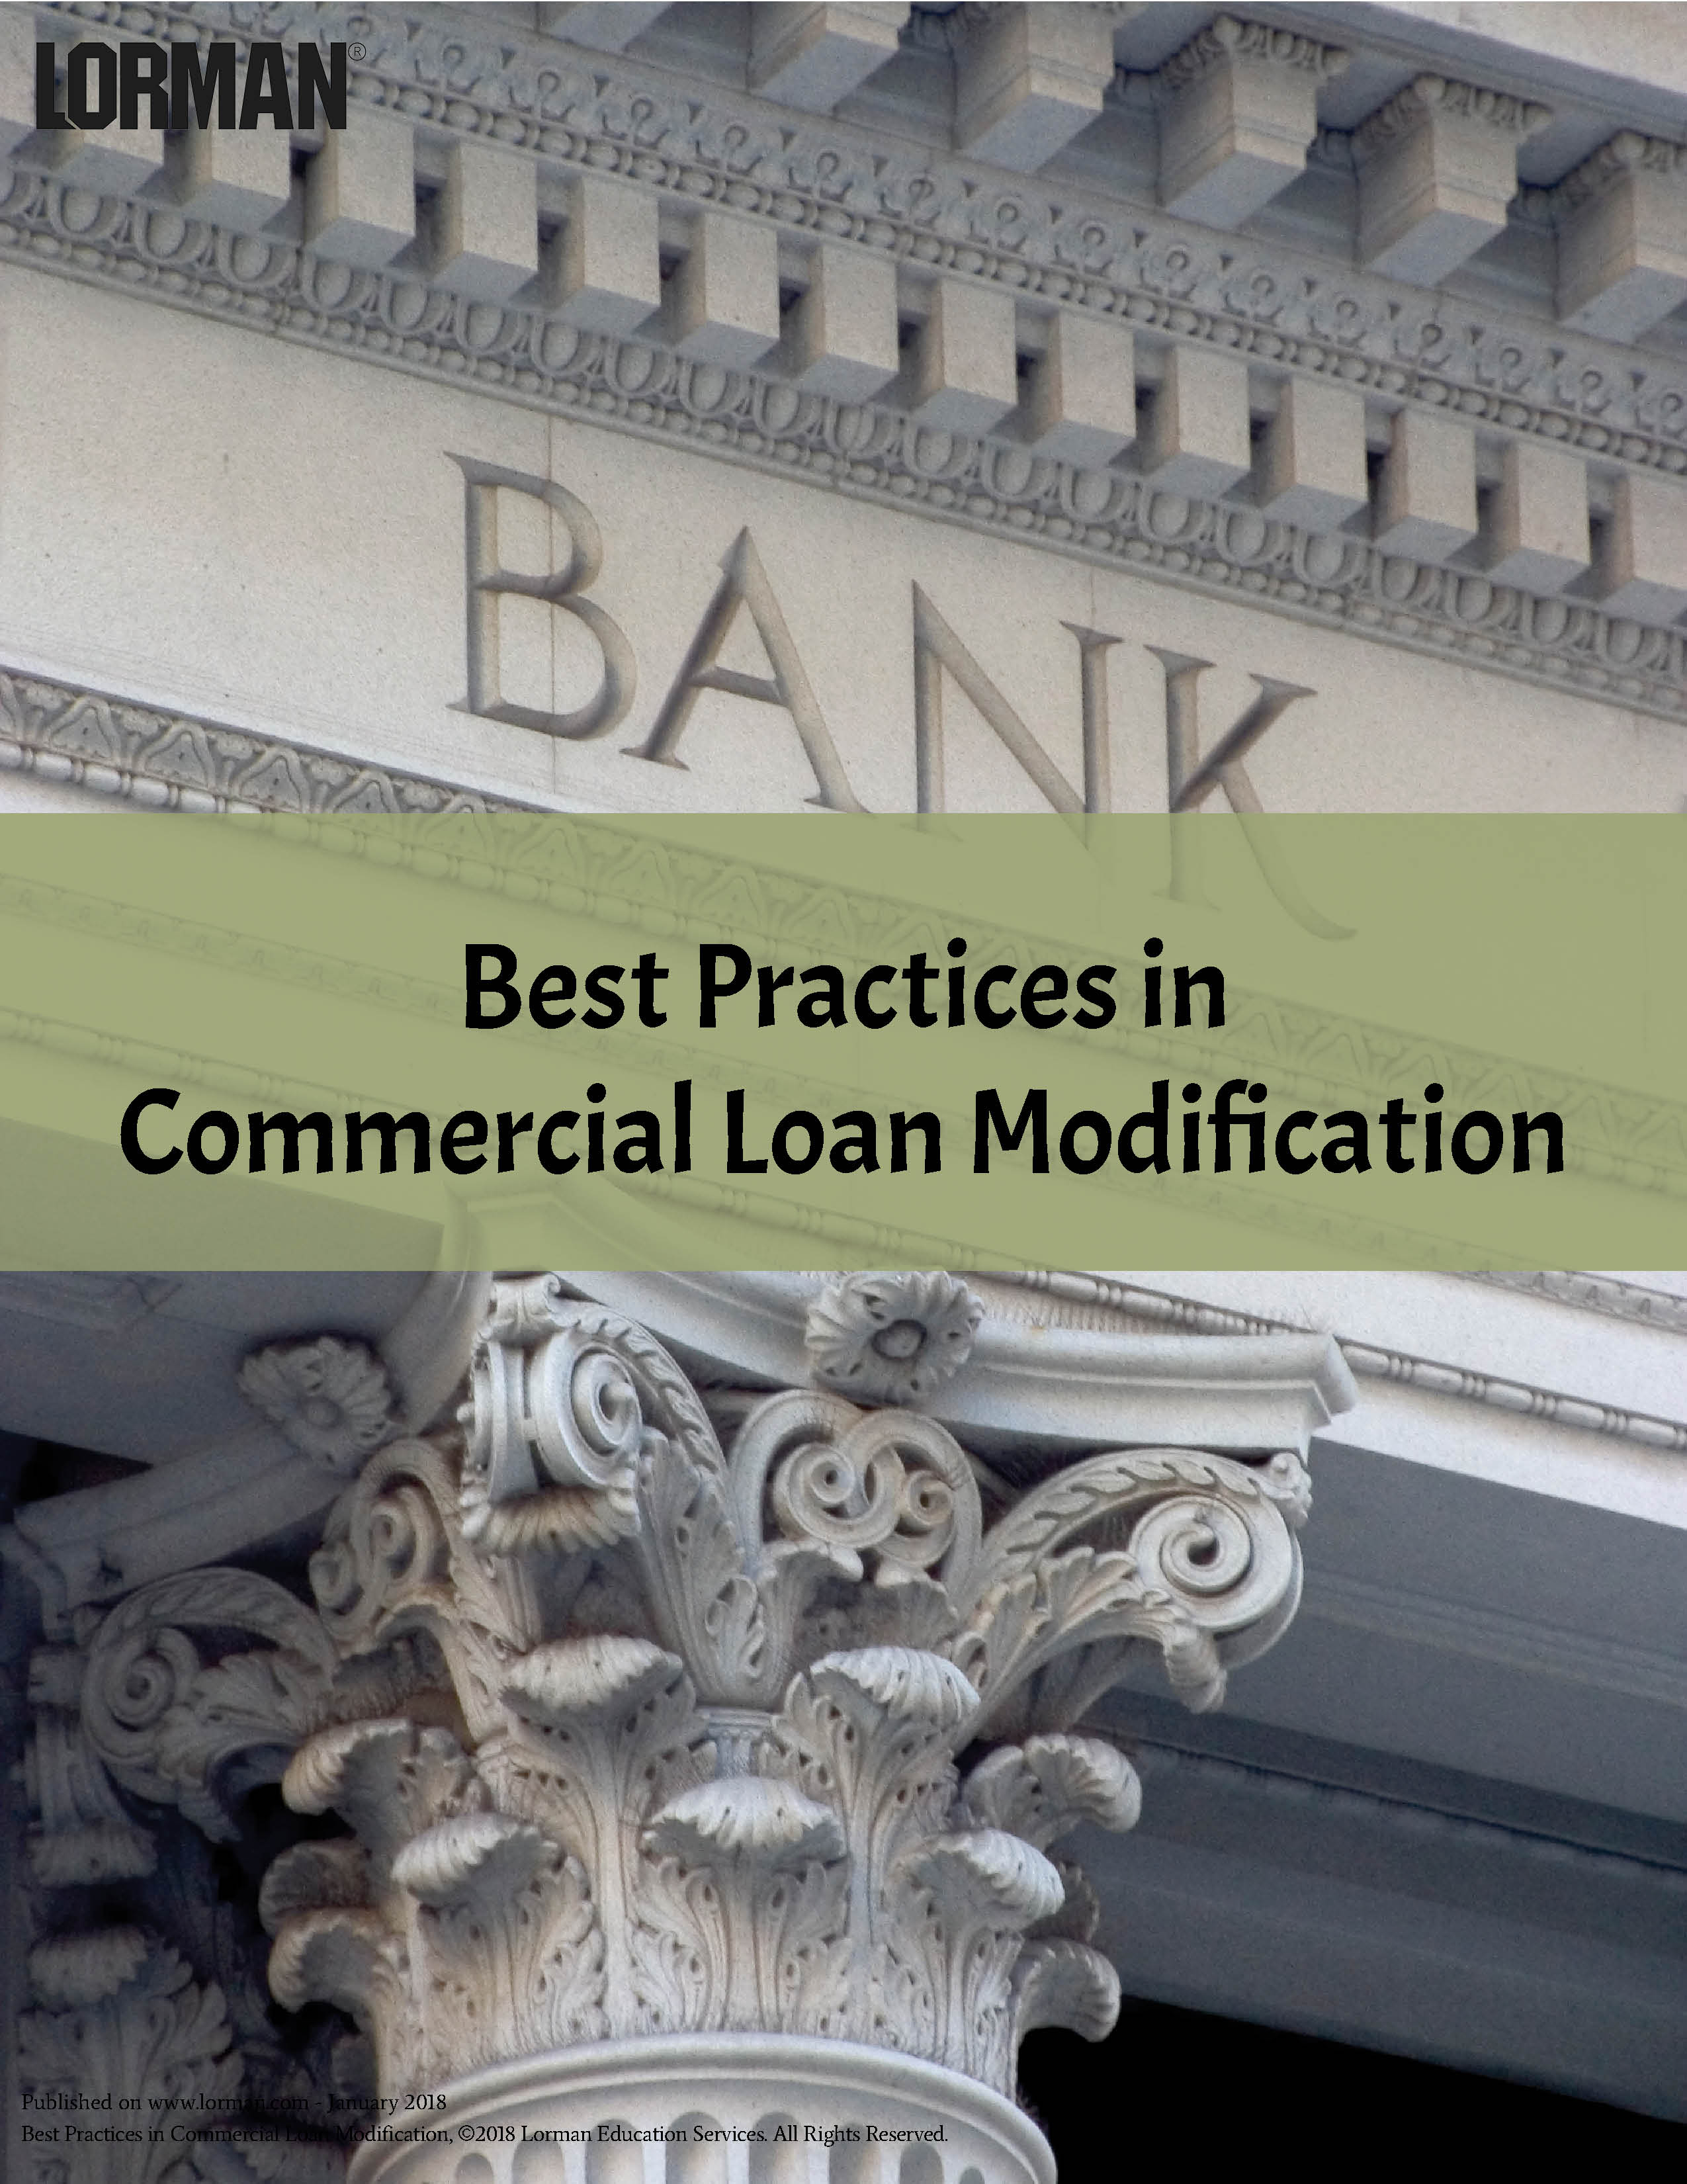 Best Practices in Commercial Loan Modification